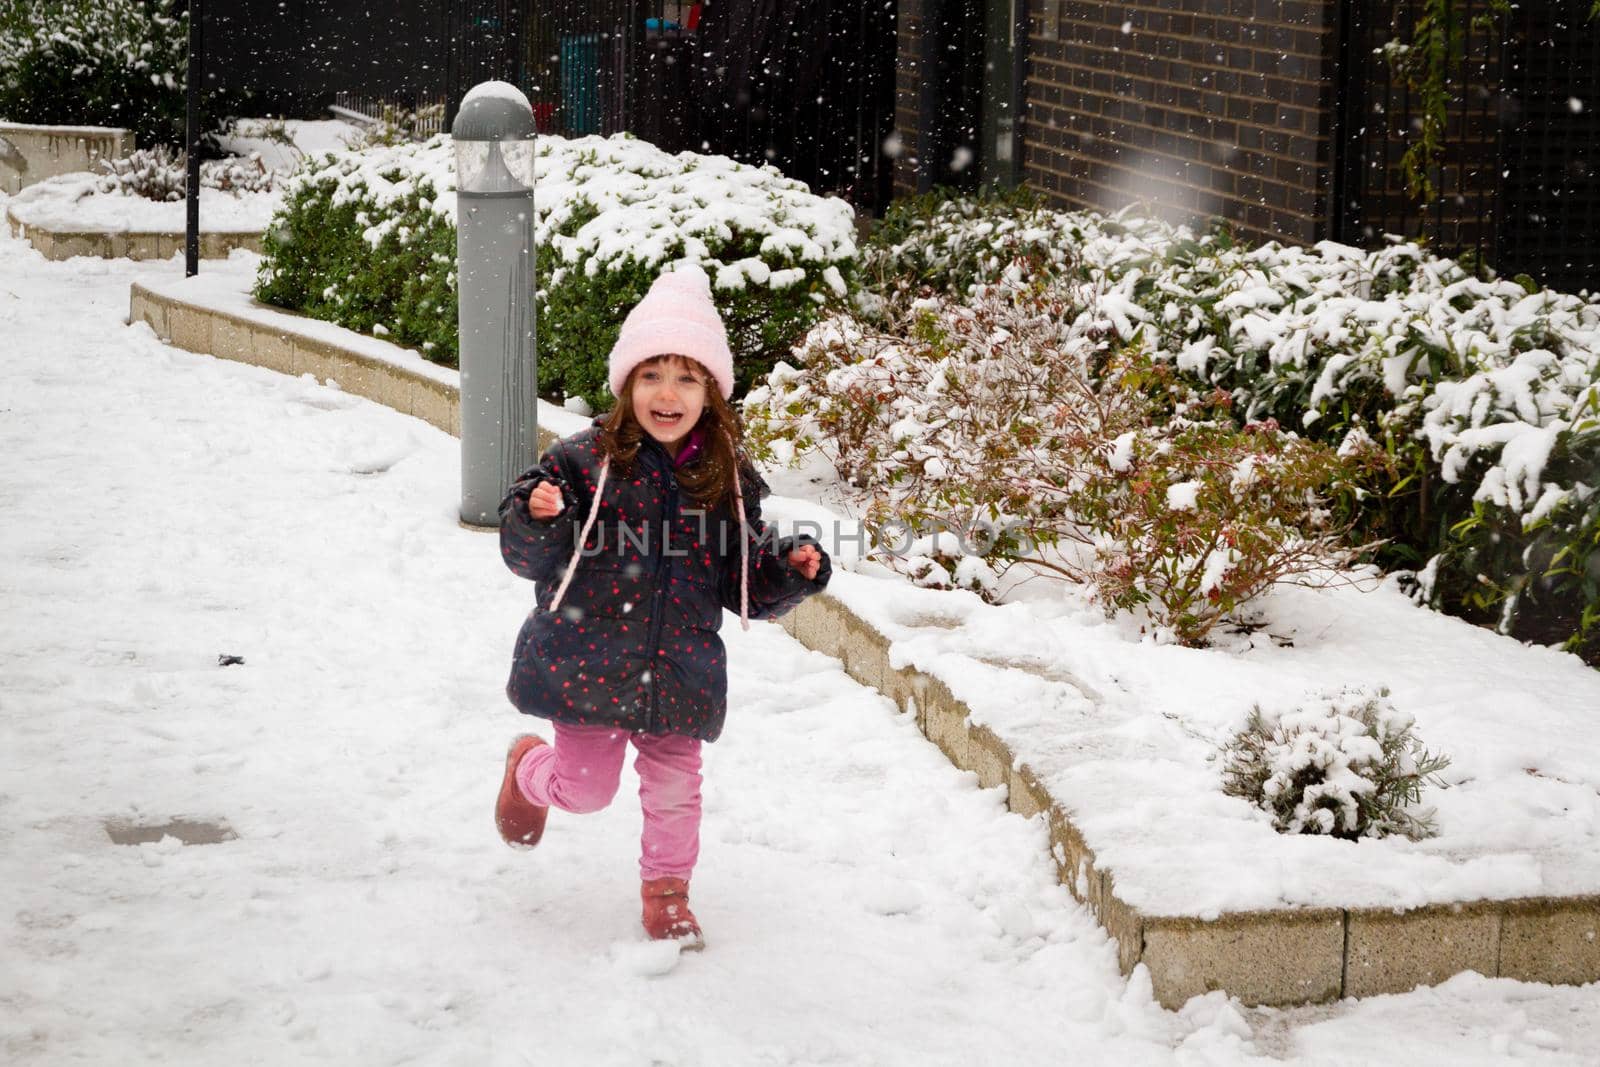 A cute, blue-eyed, brown-haired girl wearing a pink hat and ablue coat running in the snow